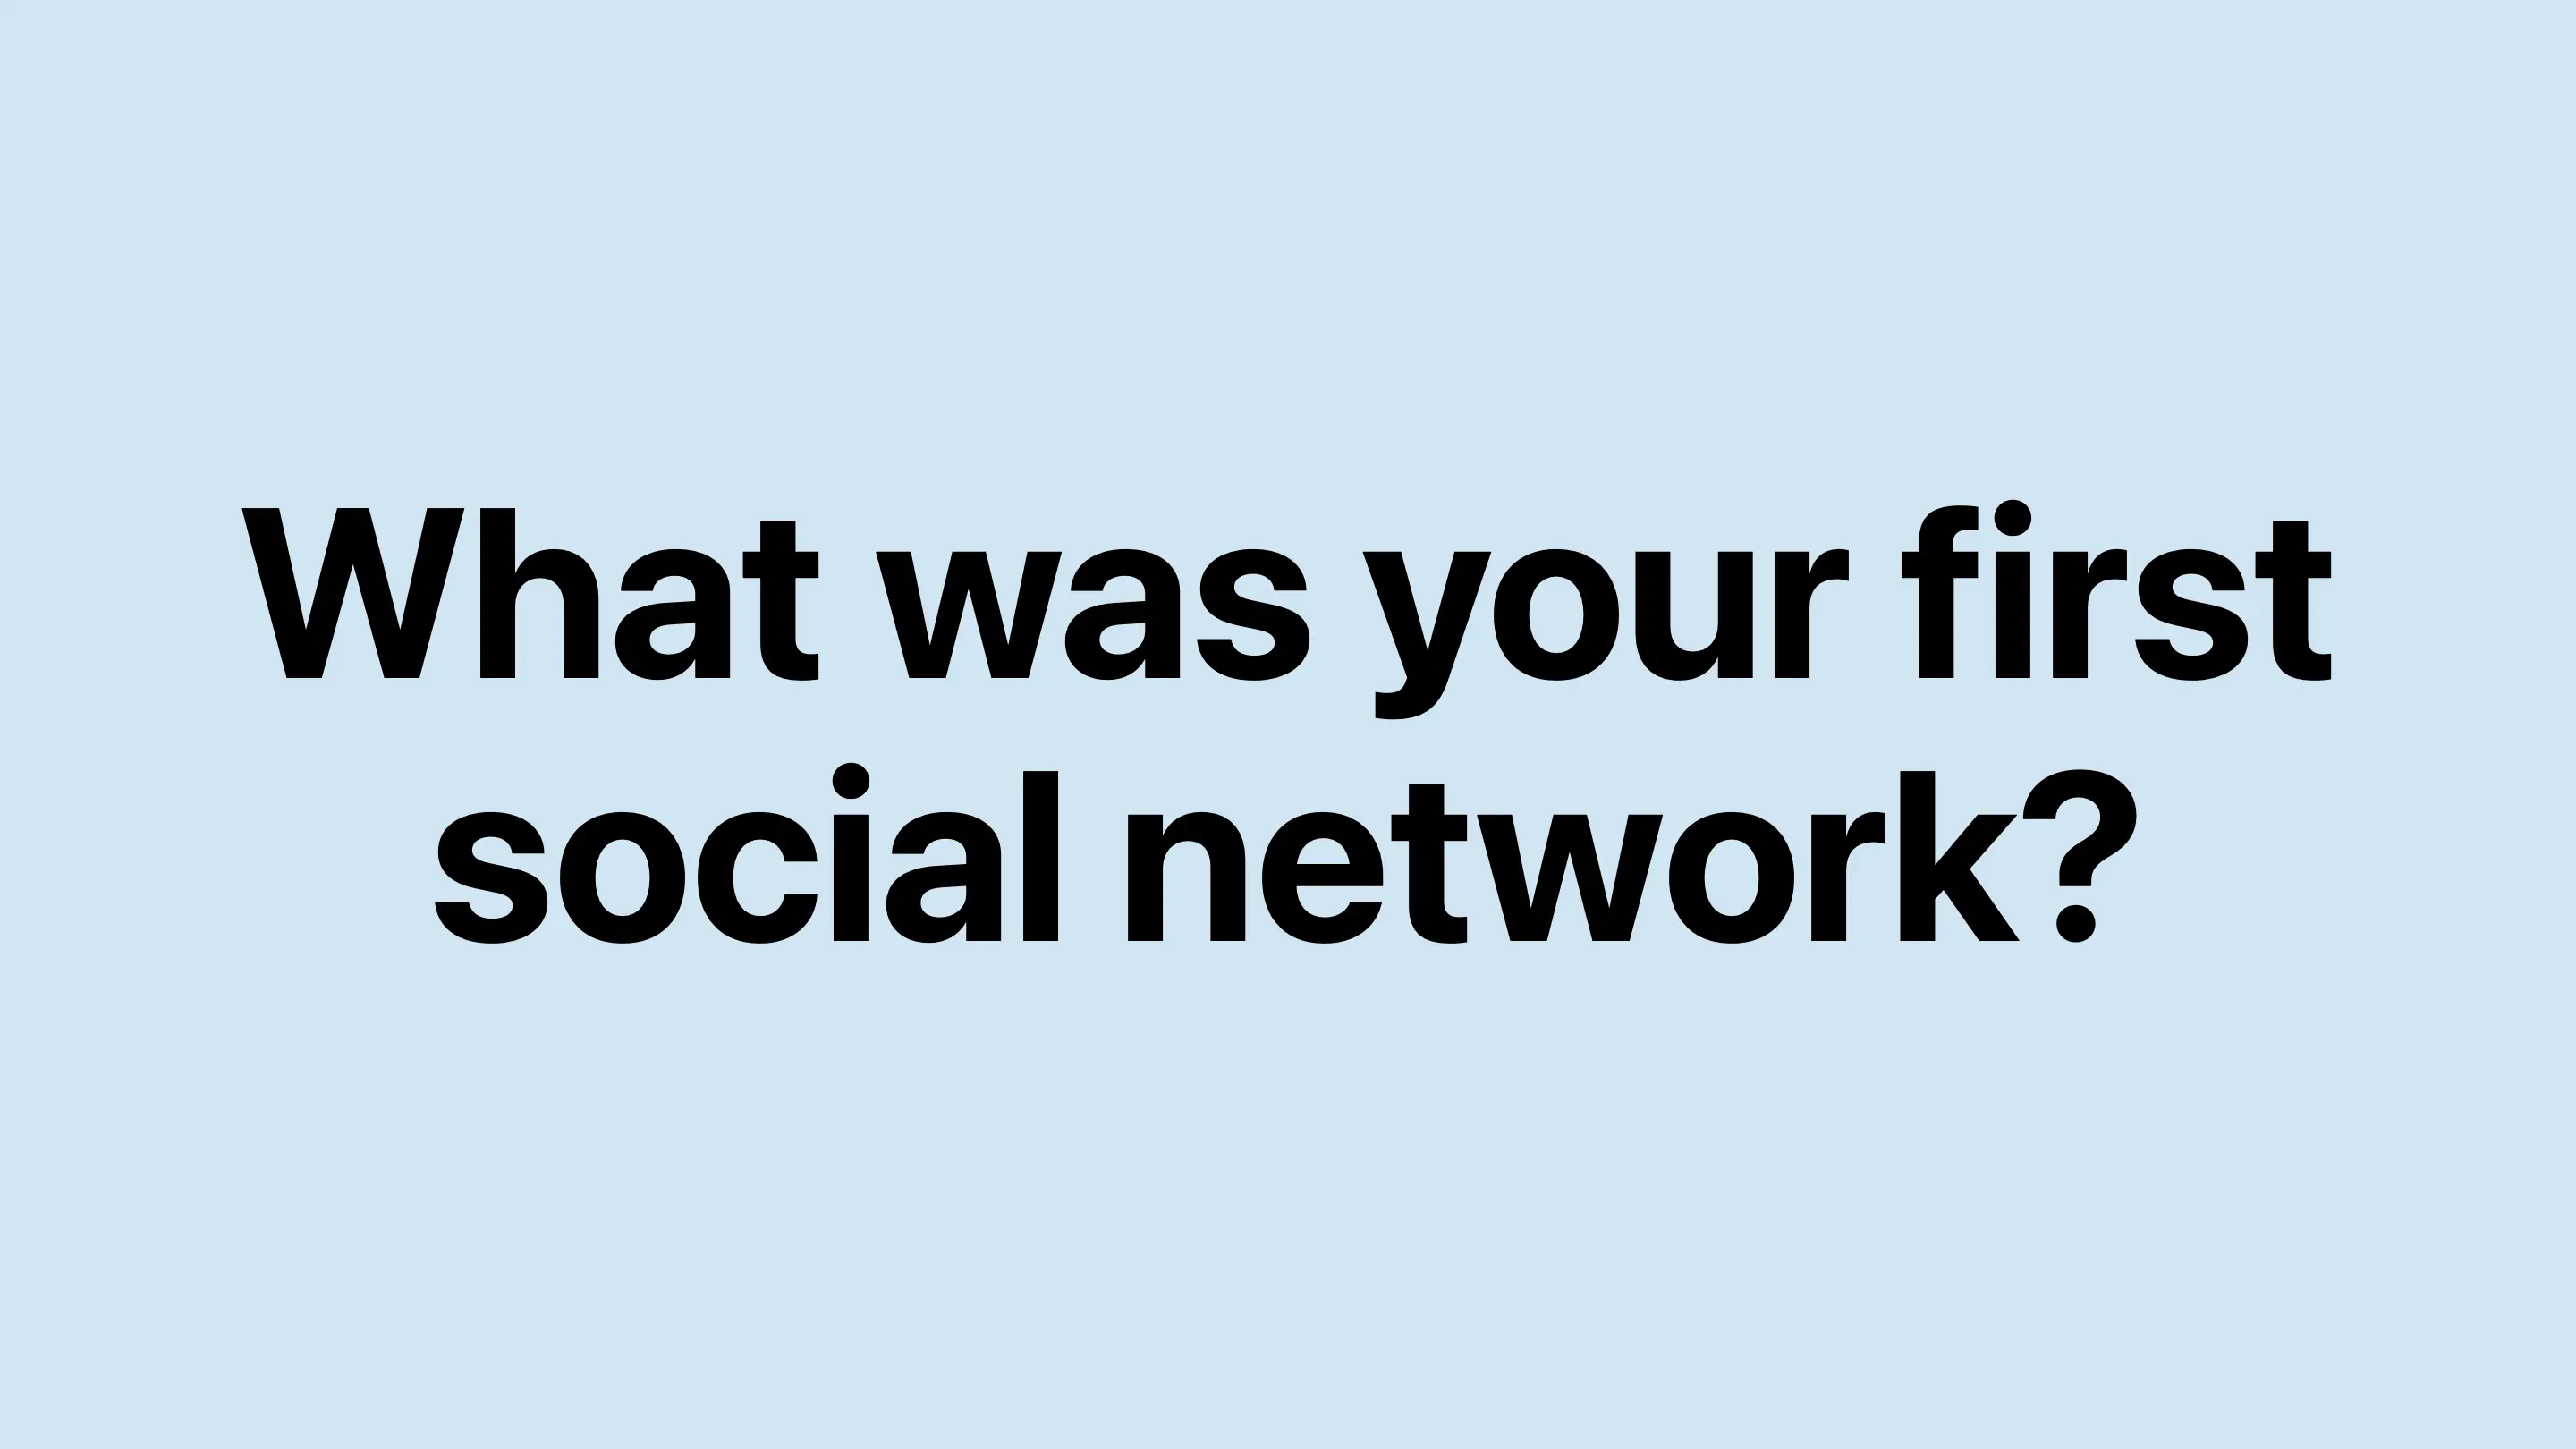 What was your first social network?